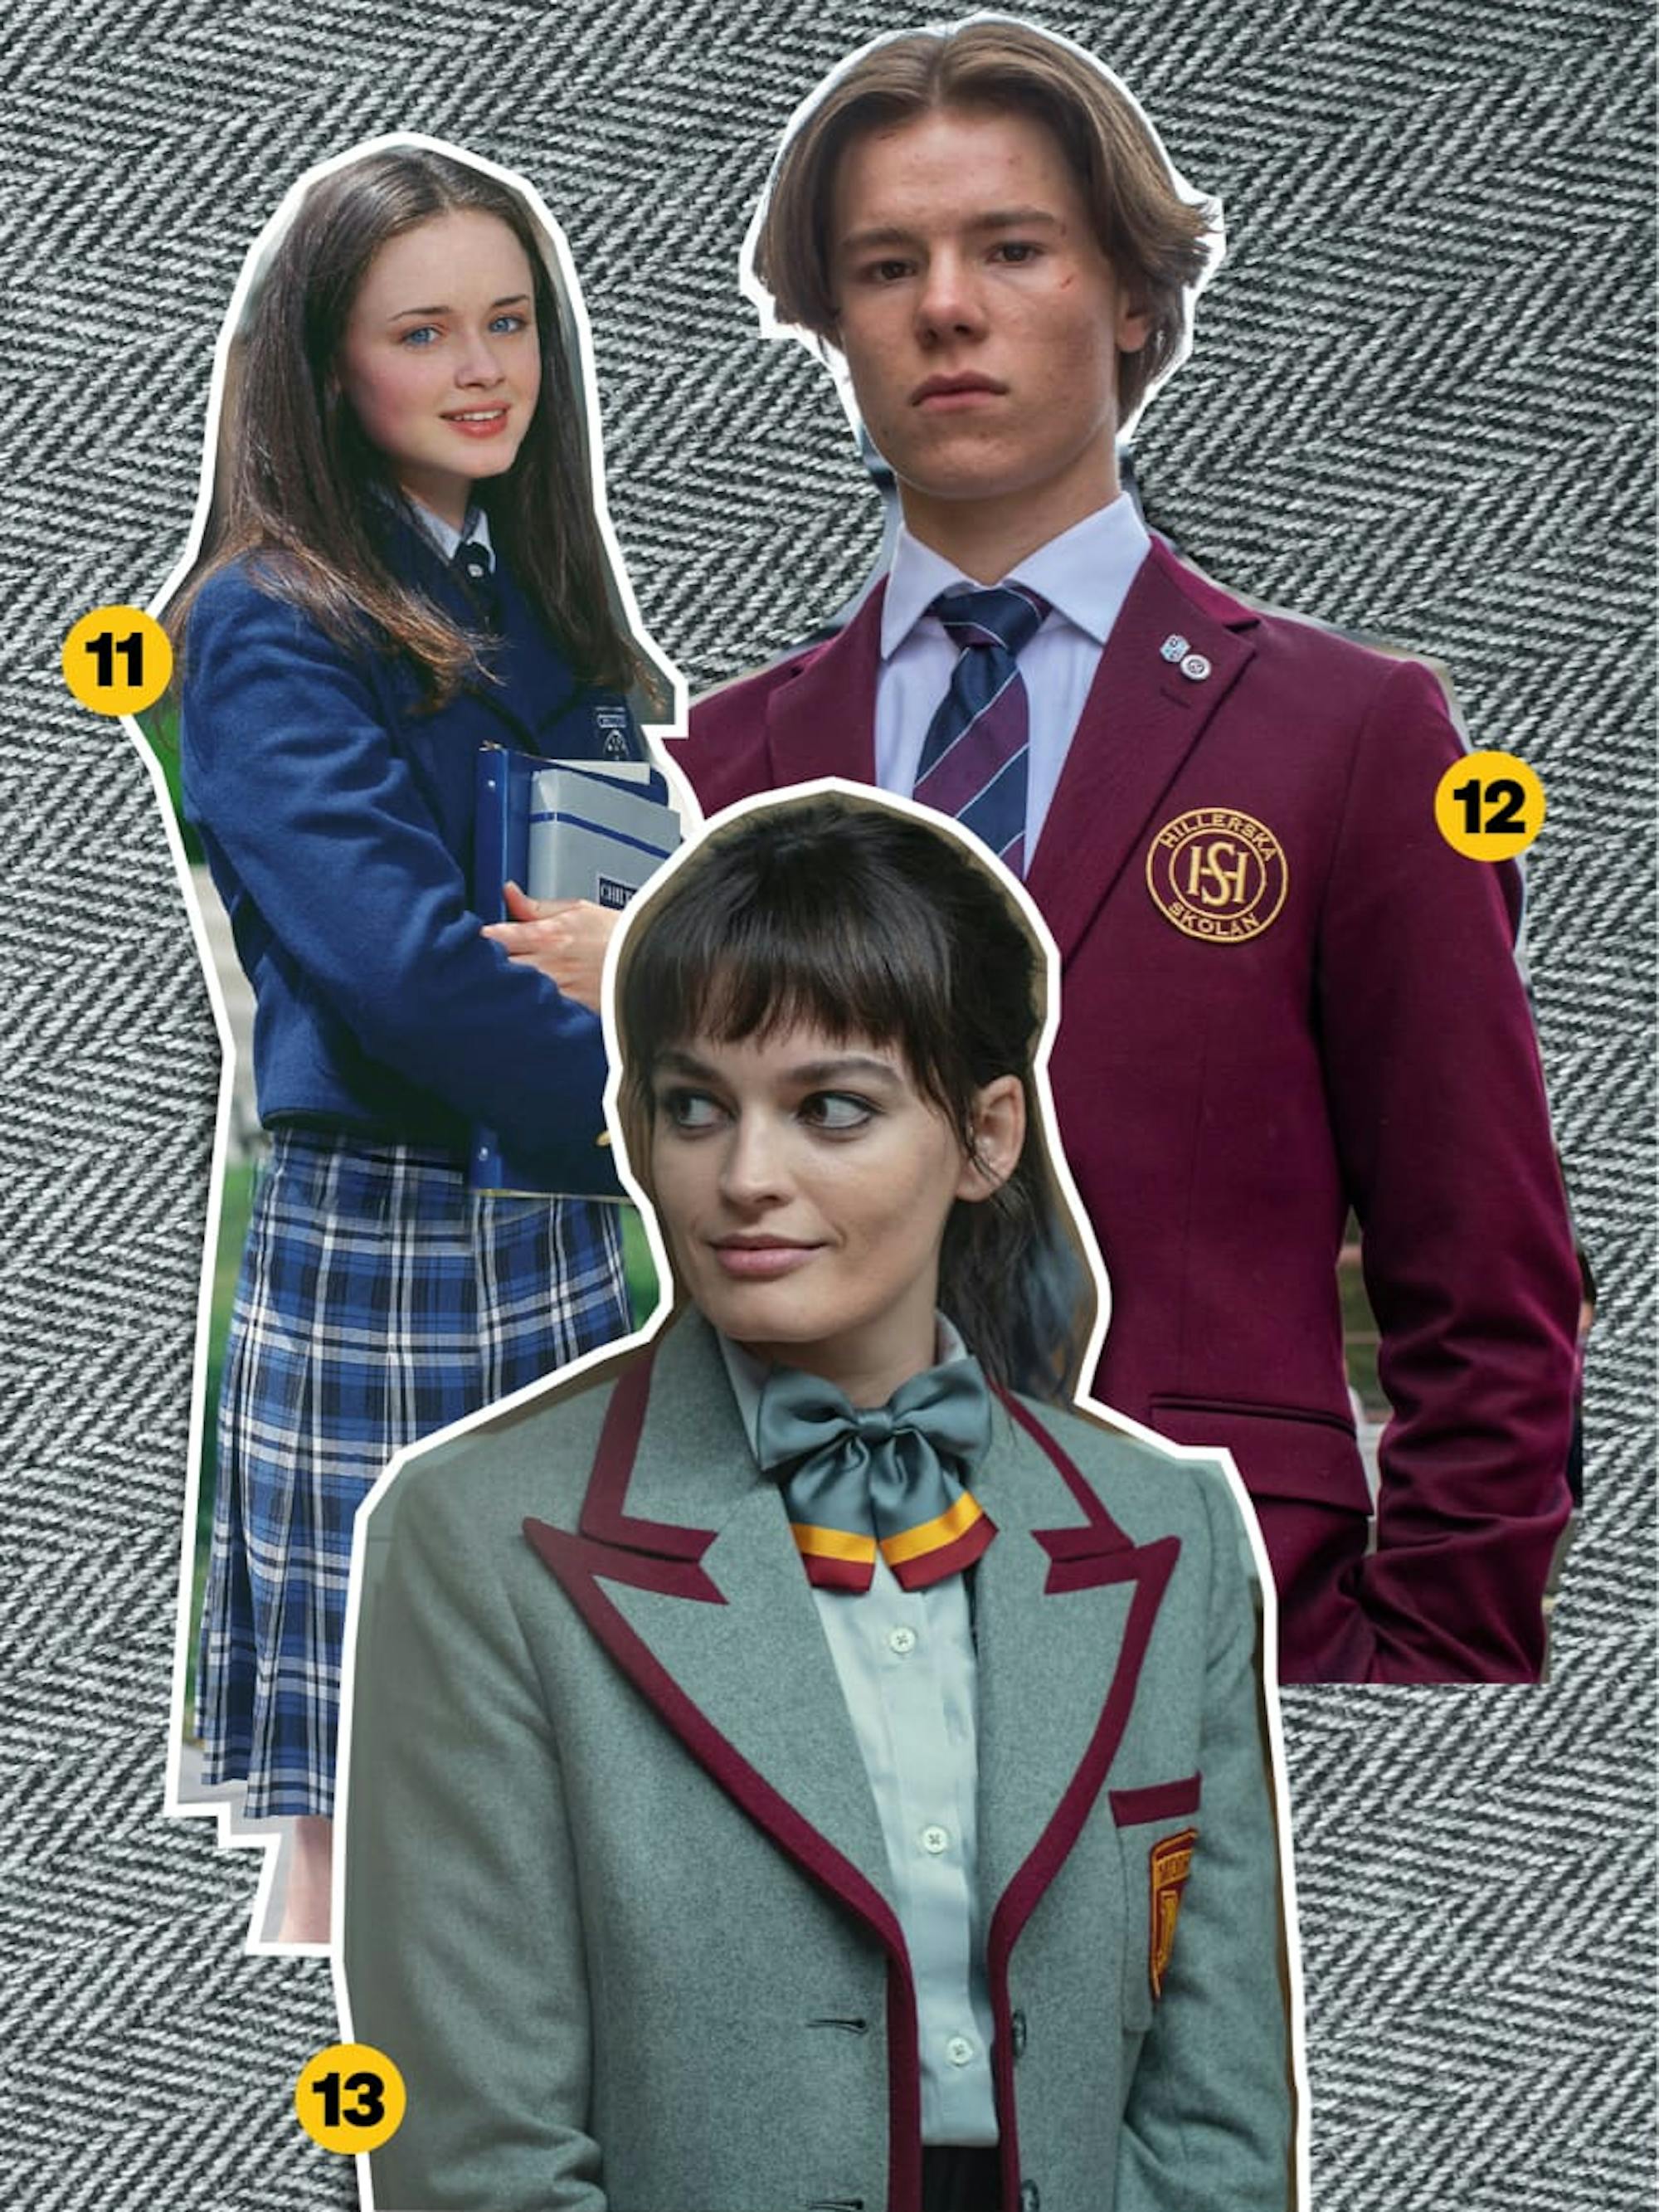 Clockwise: Alexis Bledel (Gilmore Girls), Edvin Ryding (Young Royals), and Emma Mackey (Sex Education) are collaged over a zigzagged, striped grey textile. Each wears a school uniform. Bledel’s is blue plaid with a blue blazer, Ryding’s is burgundy with a blue and burgundy tie and blue collared shirt, and Mackey’s is grey with red details and a cute grey, gold, and red neck bow.